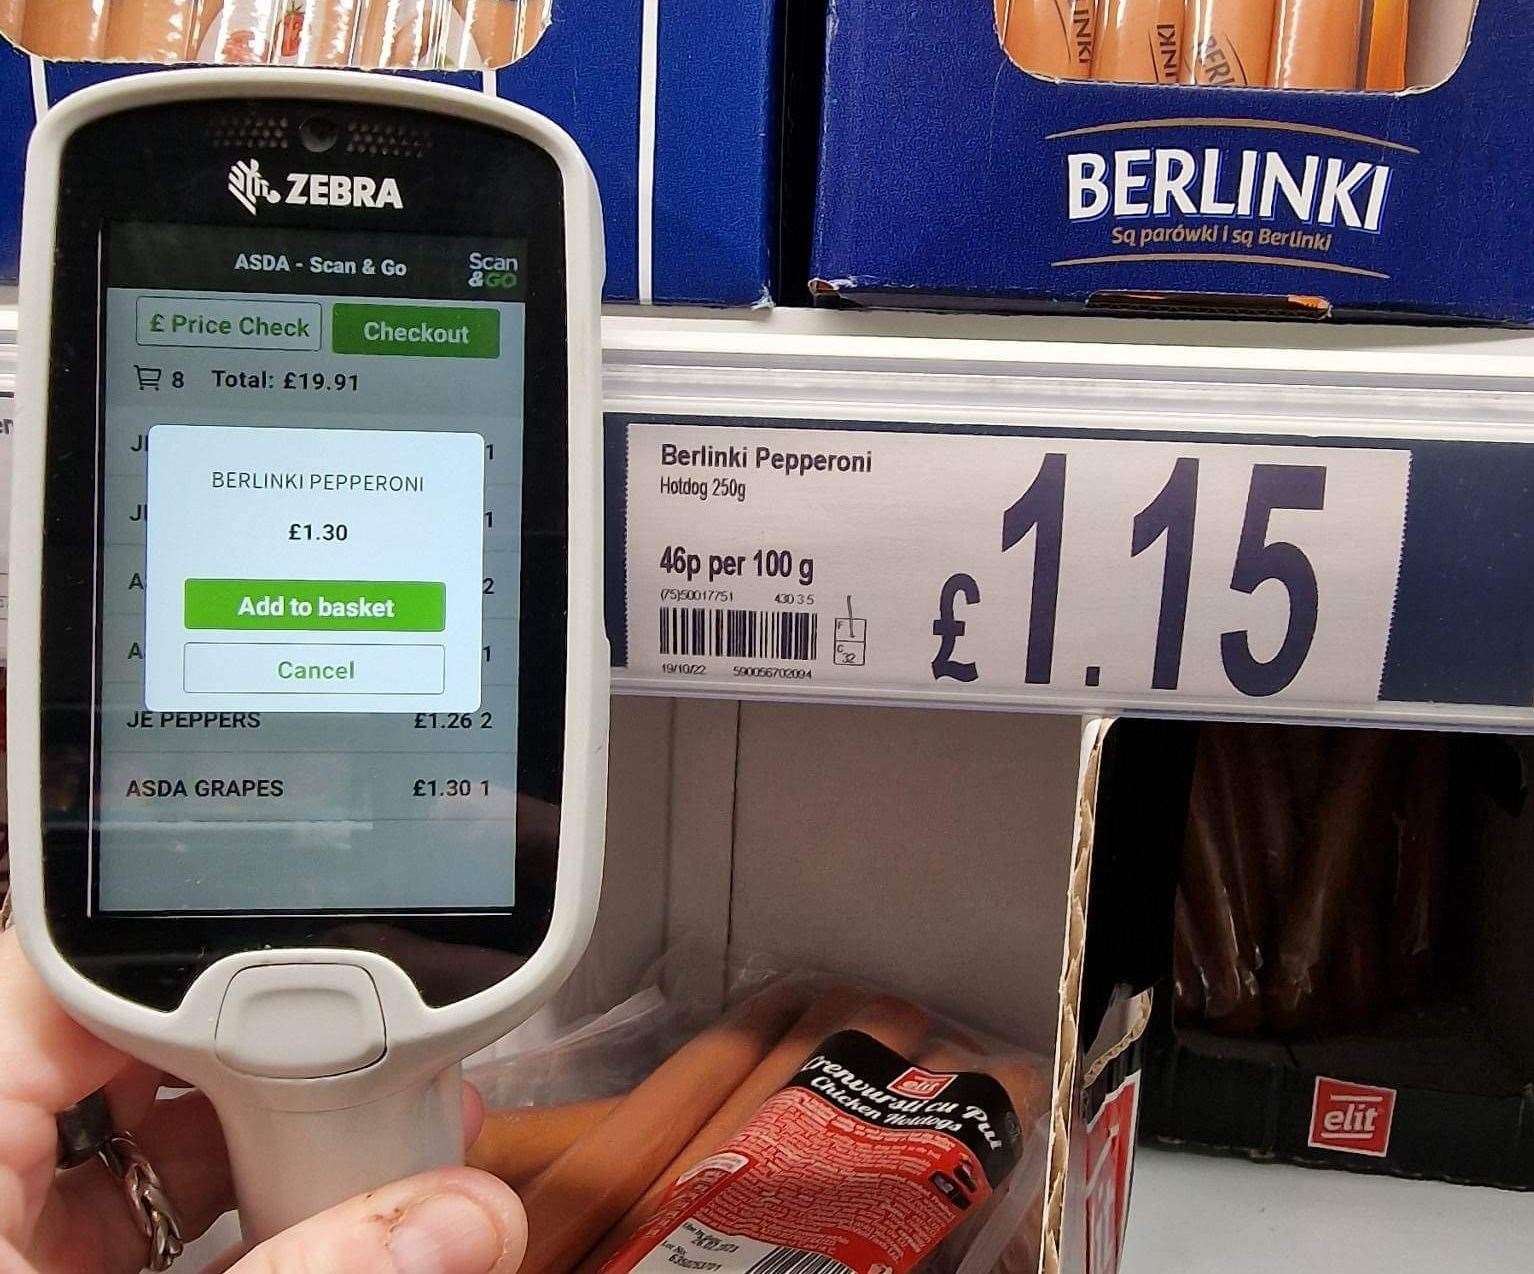 Pepperoni was scanning at 15p more than the advertised price